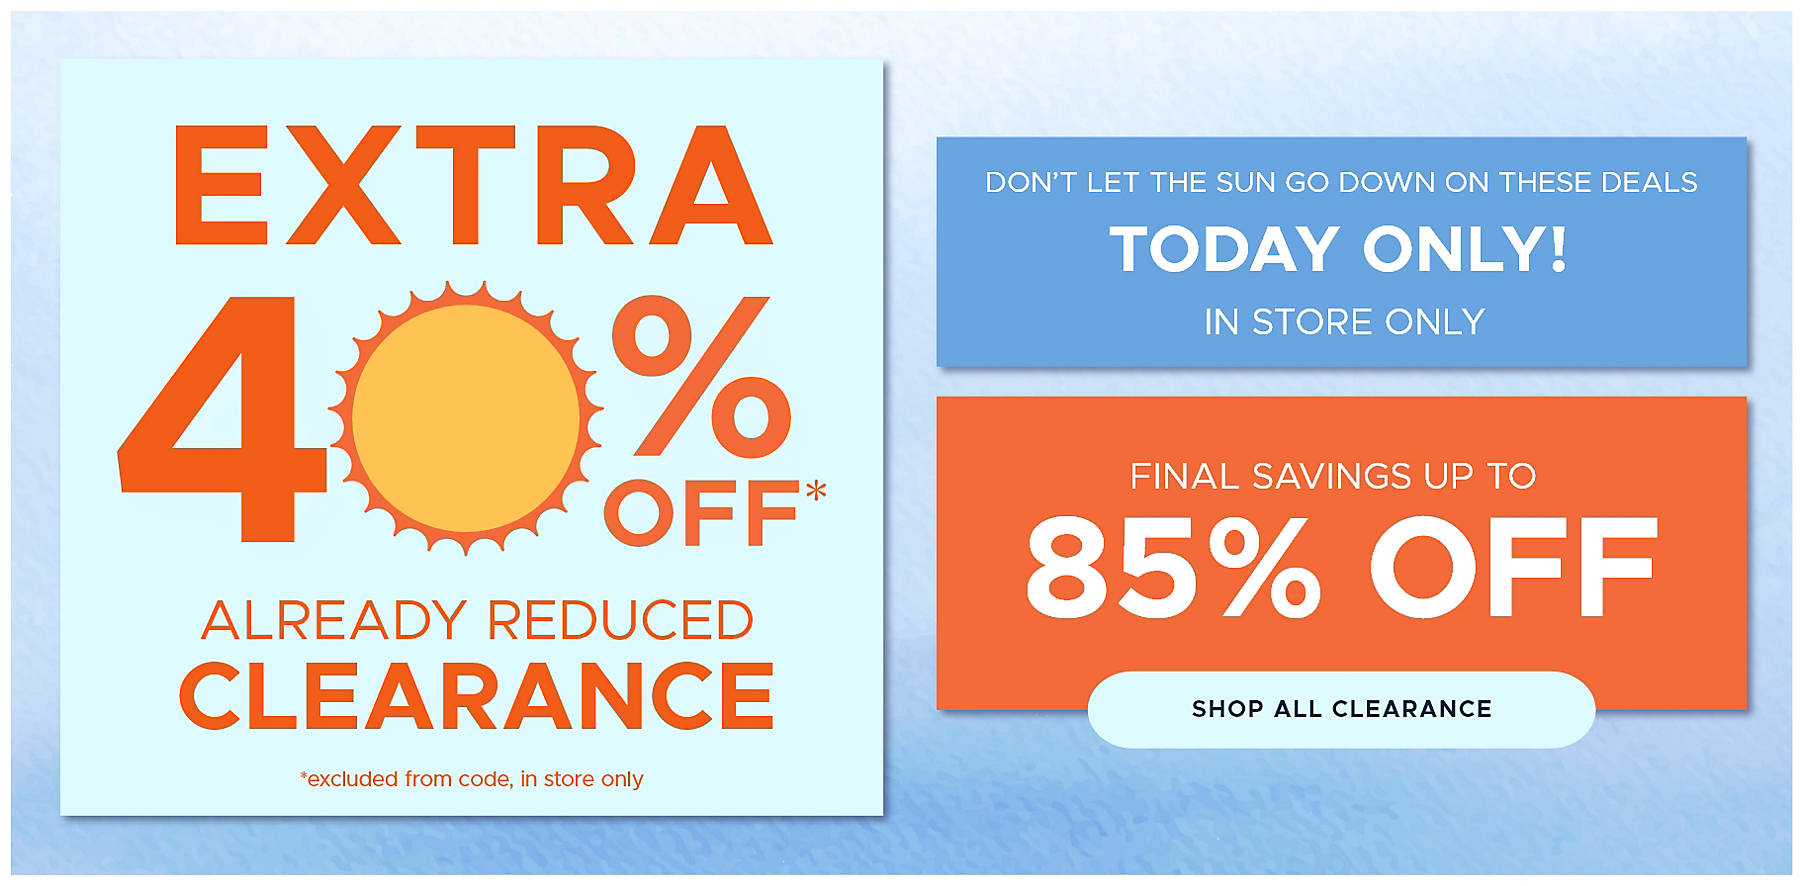 don't let the sun go down on these deals today only! in store only final savings up to 85% off shop all clearance extra 40% off* already reduced clearance *excluded from code, in store only